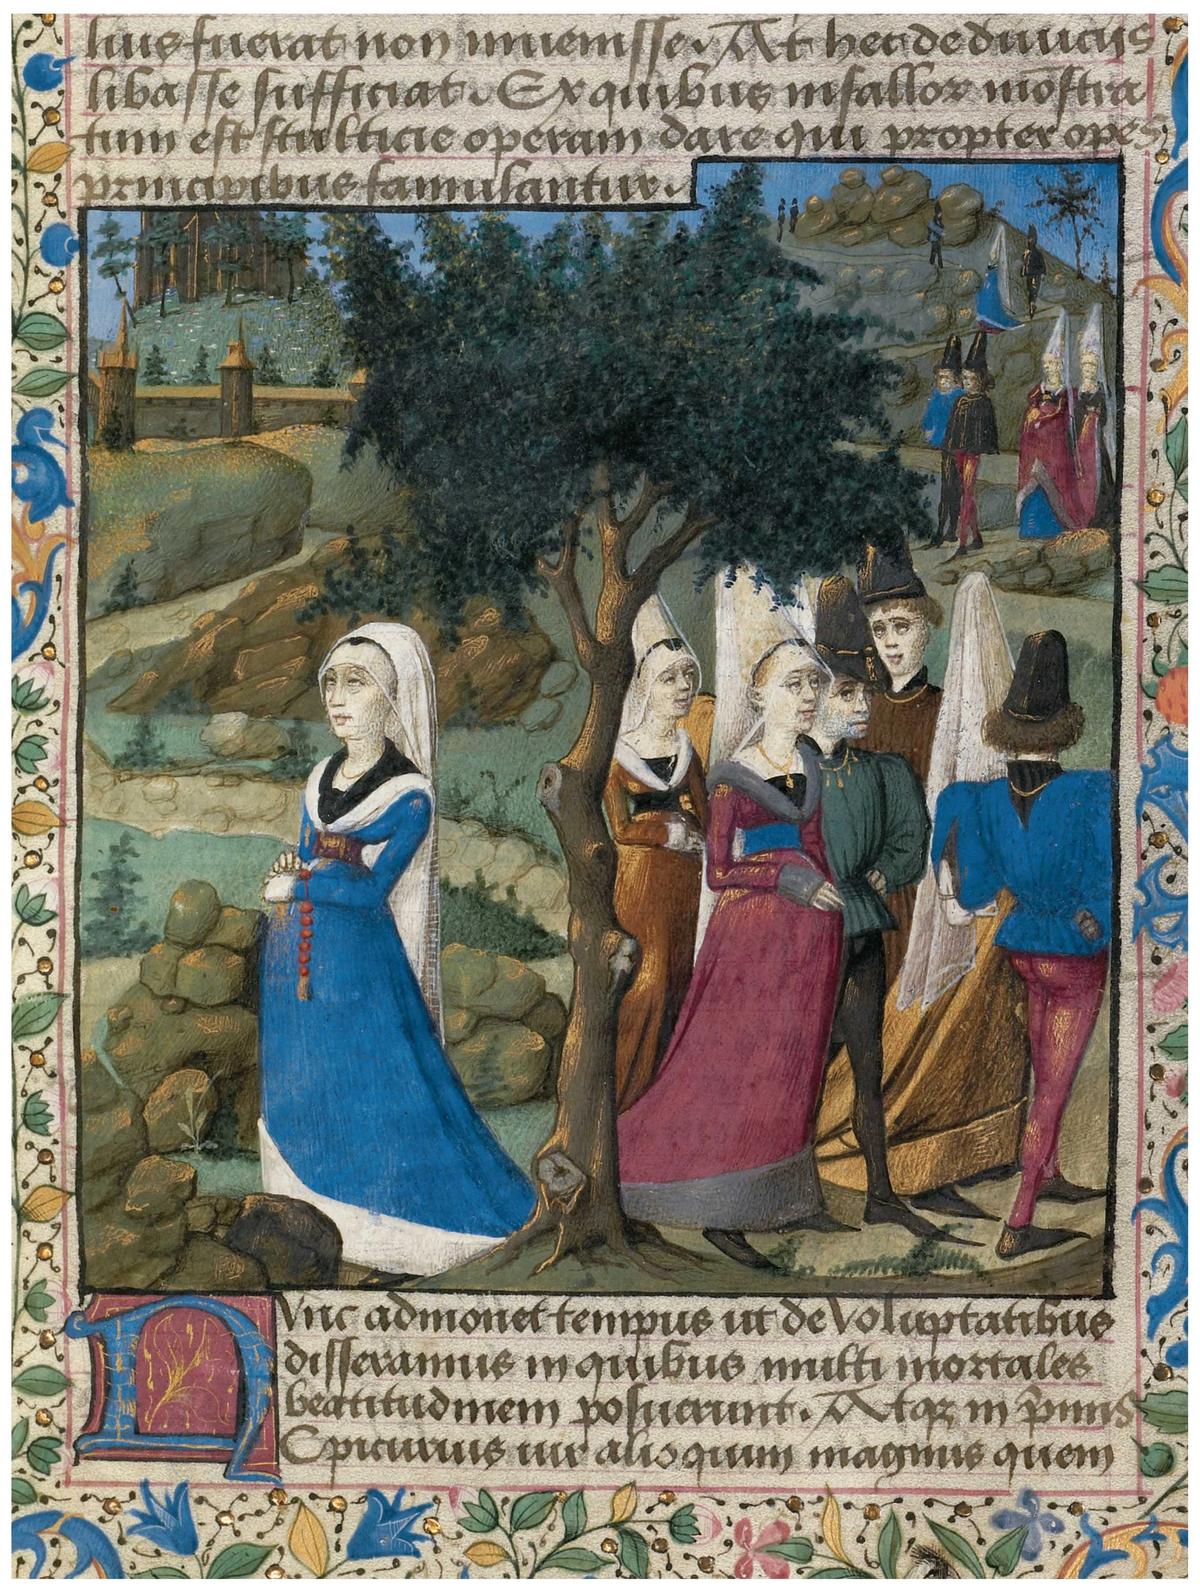 The 15th-century Story of Two Lovers by Aeneas Silvius Piccolomini Courtesy of the J. Paul Getty Museum, Ms. 68, fol. 8